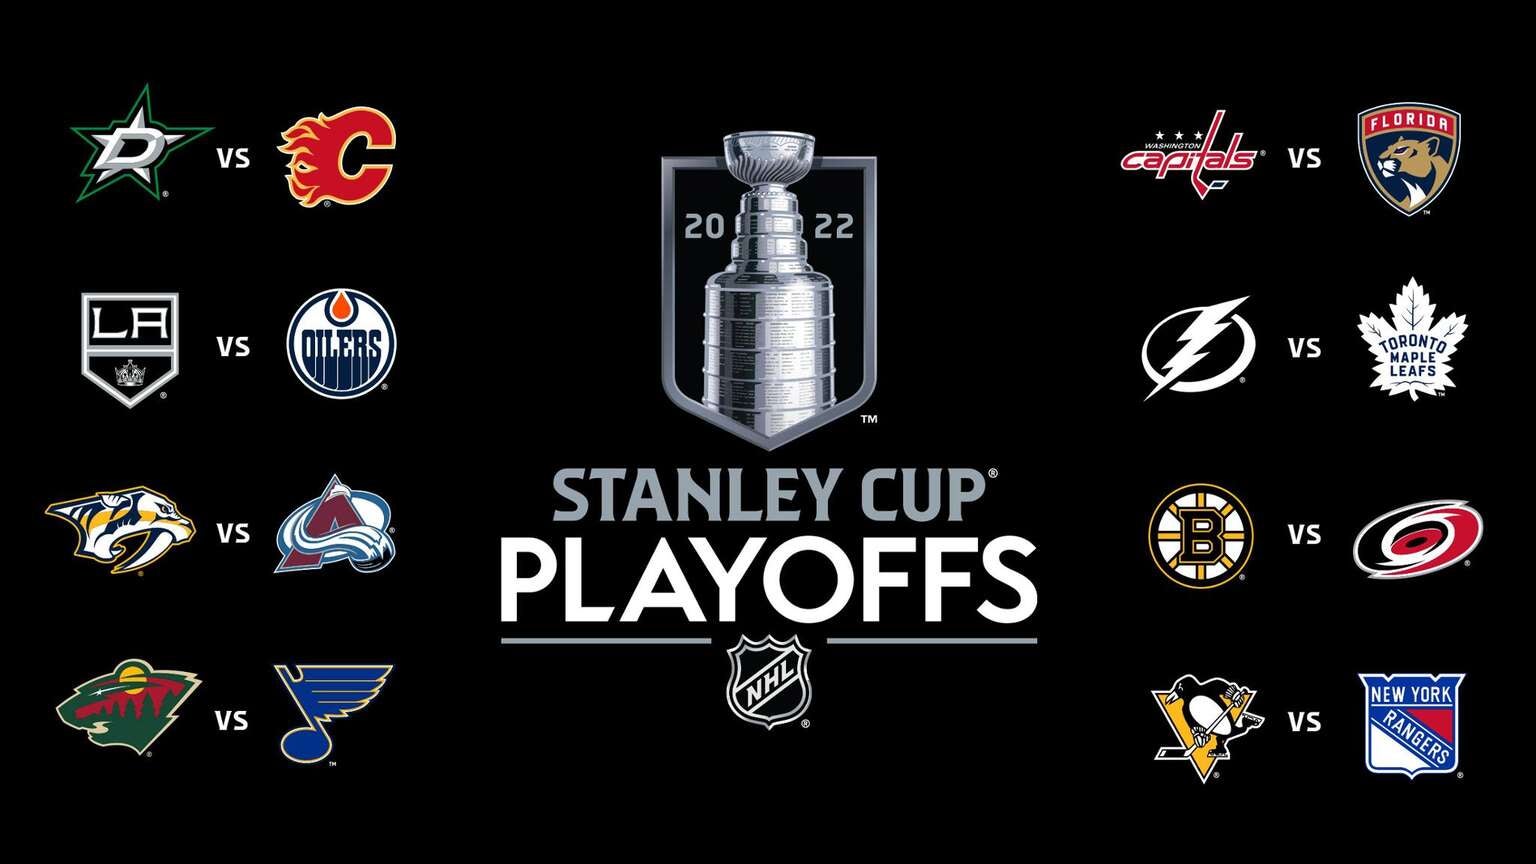 NHL Releases 2022 Stanley Cup Playoff TV Schedule The Streamable (PT)